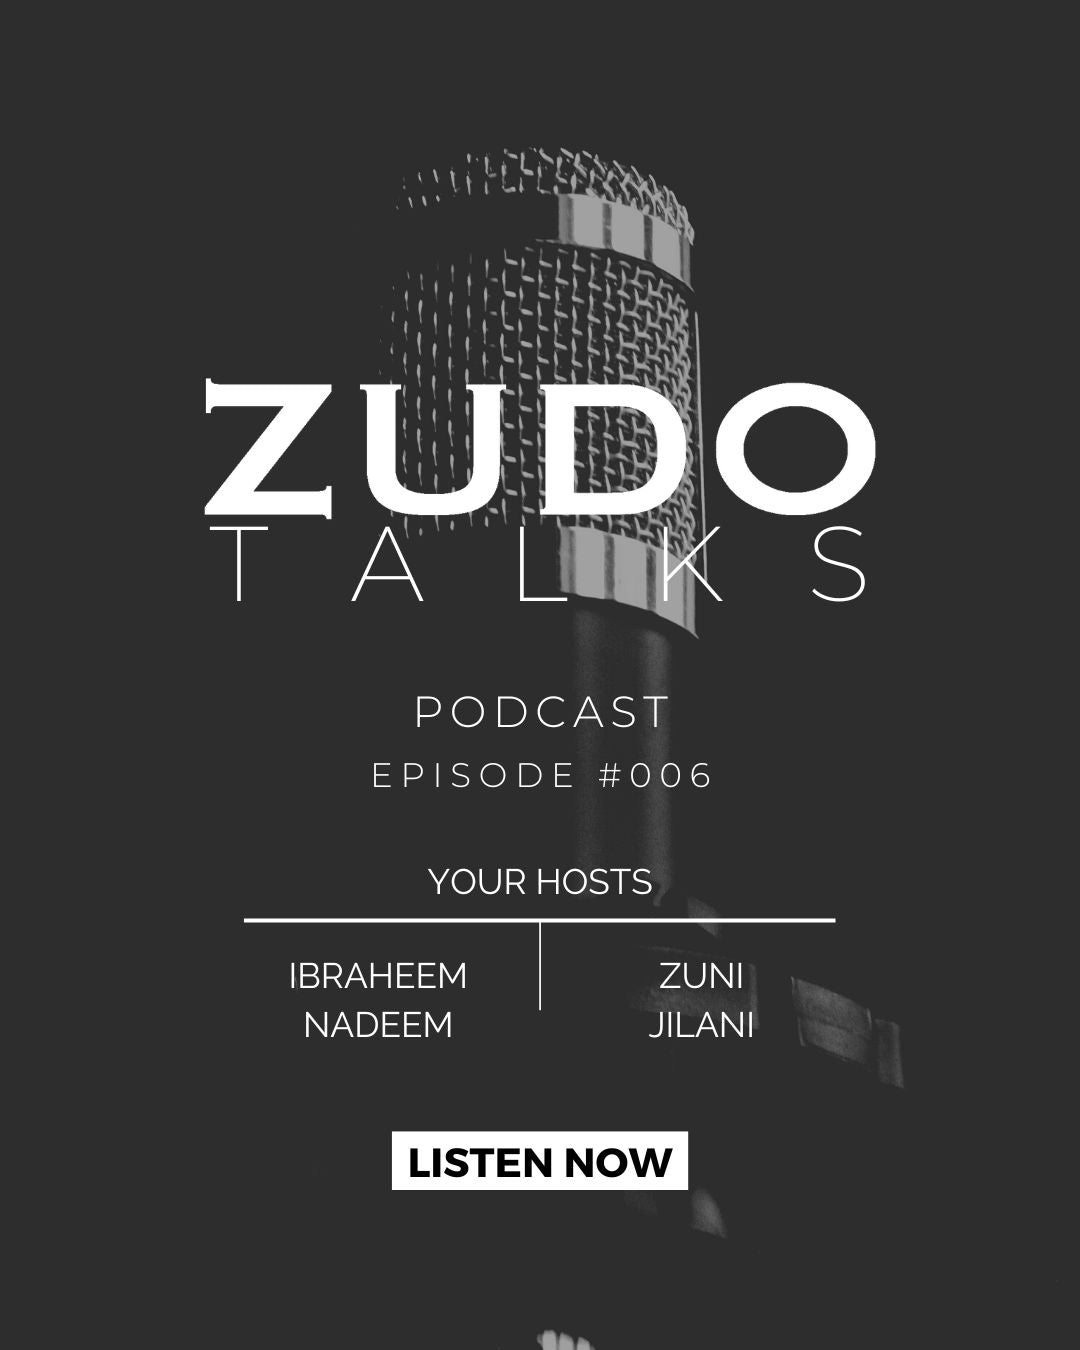 Our struggle with Burnout and Mental Health | ZUDO Talks Podcast - Episode #006